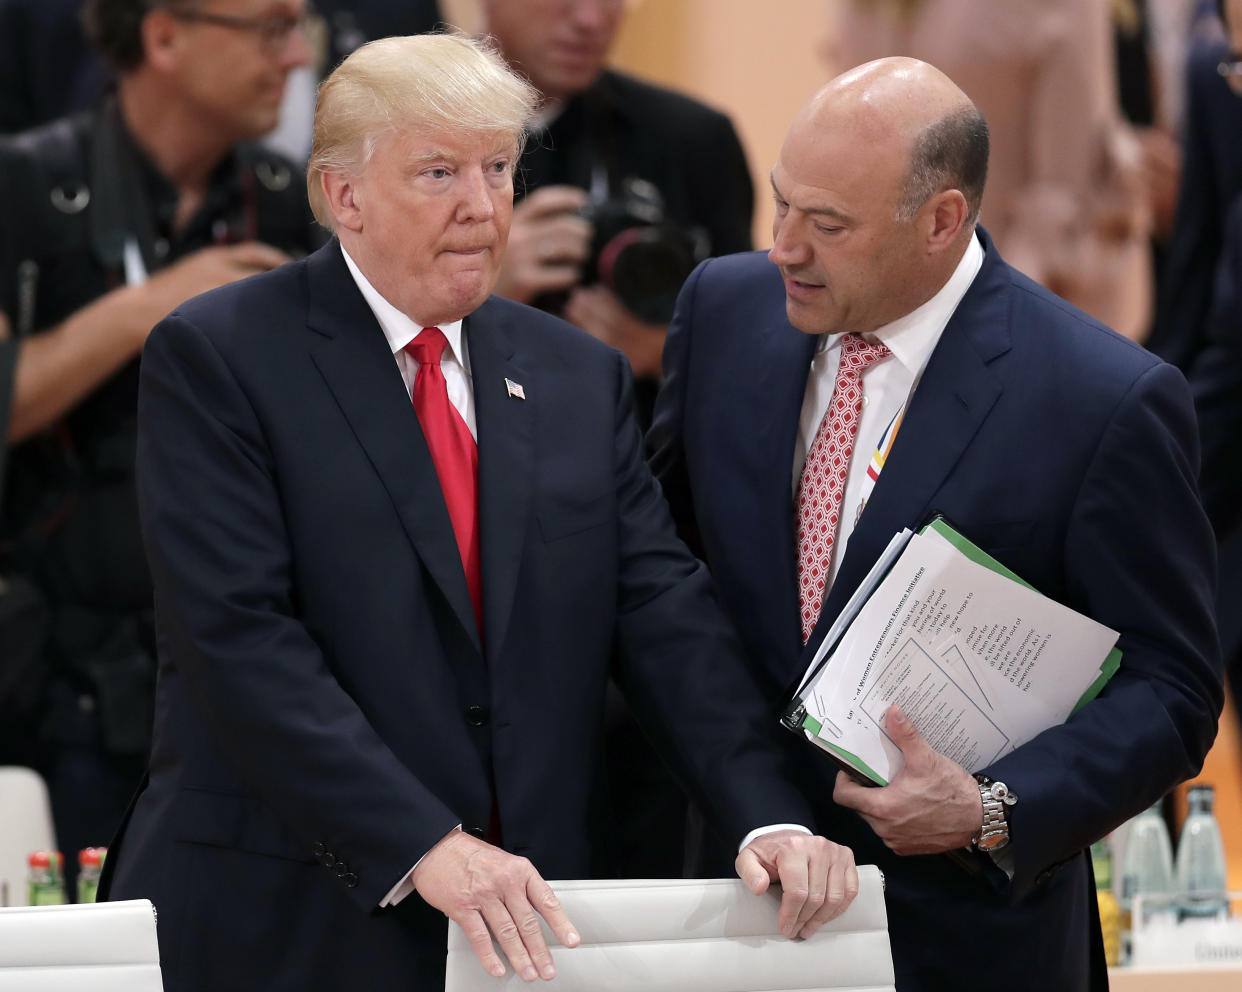 FILE – In this Saturday, July 8, 2017, file photo, White House chief economic adviser Gary Cohn, right, talks to U.S. President Donald Trump prior to a working session at the G-20 summit in Hamburg, Germany. Trump and his Republican partners in a nearly $6 trillion tax-cutting plan insist it would benefit middle-class Americans and not the wealthy. But a key provision of the plan would slash tax rates for a special kind of business set up by owners of profitable firms, including Trump and his family. (AP Photo/Michael Sohn, File)